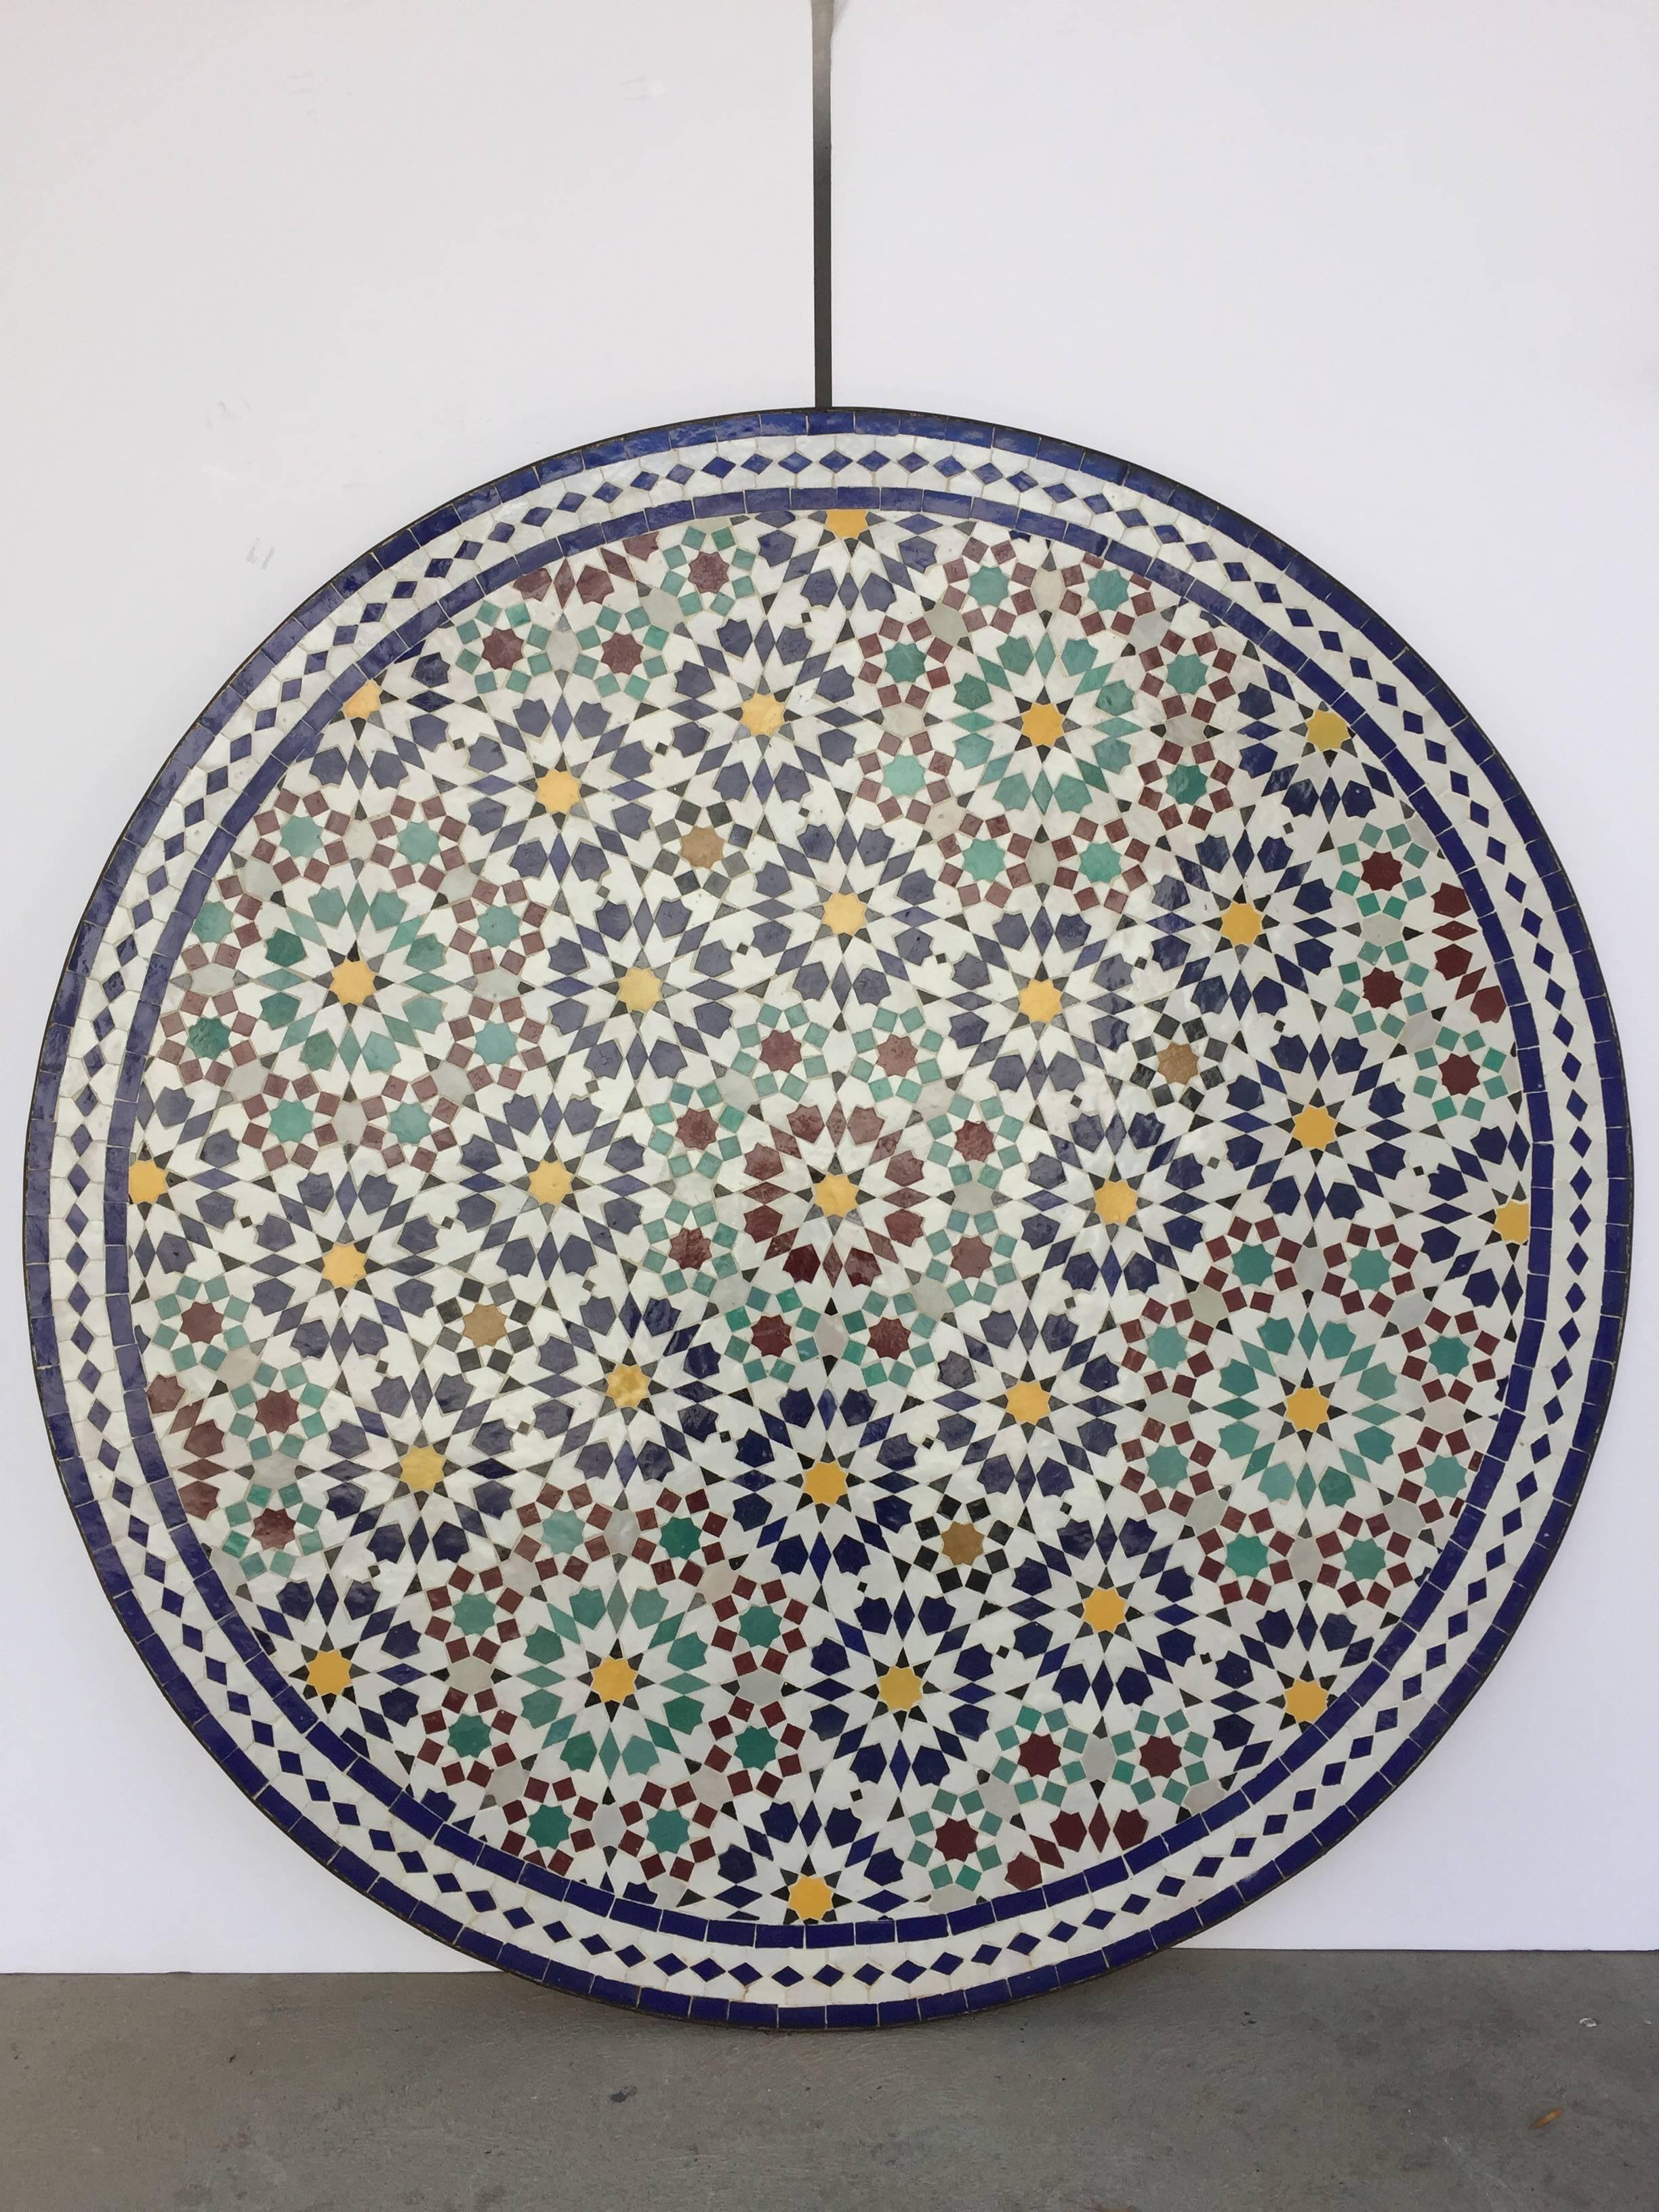 20th Century Moroccan Round Mosaic Outdoor Tile Table in Fez Moorish Design For Sale